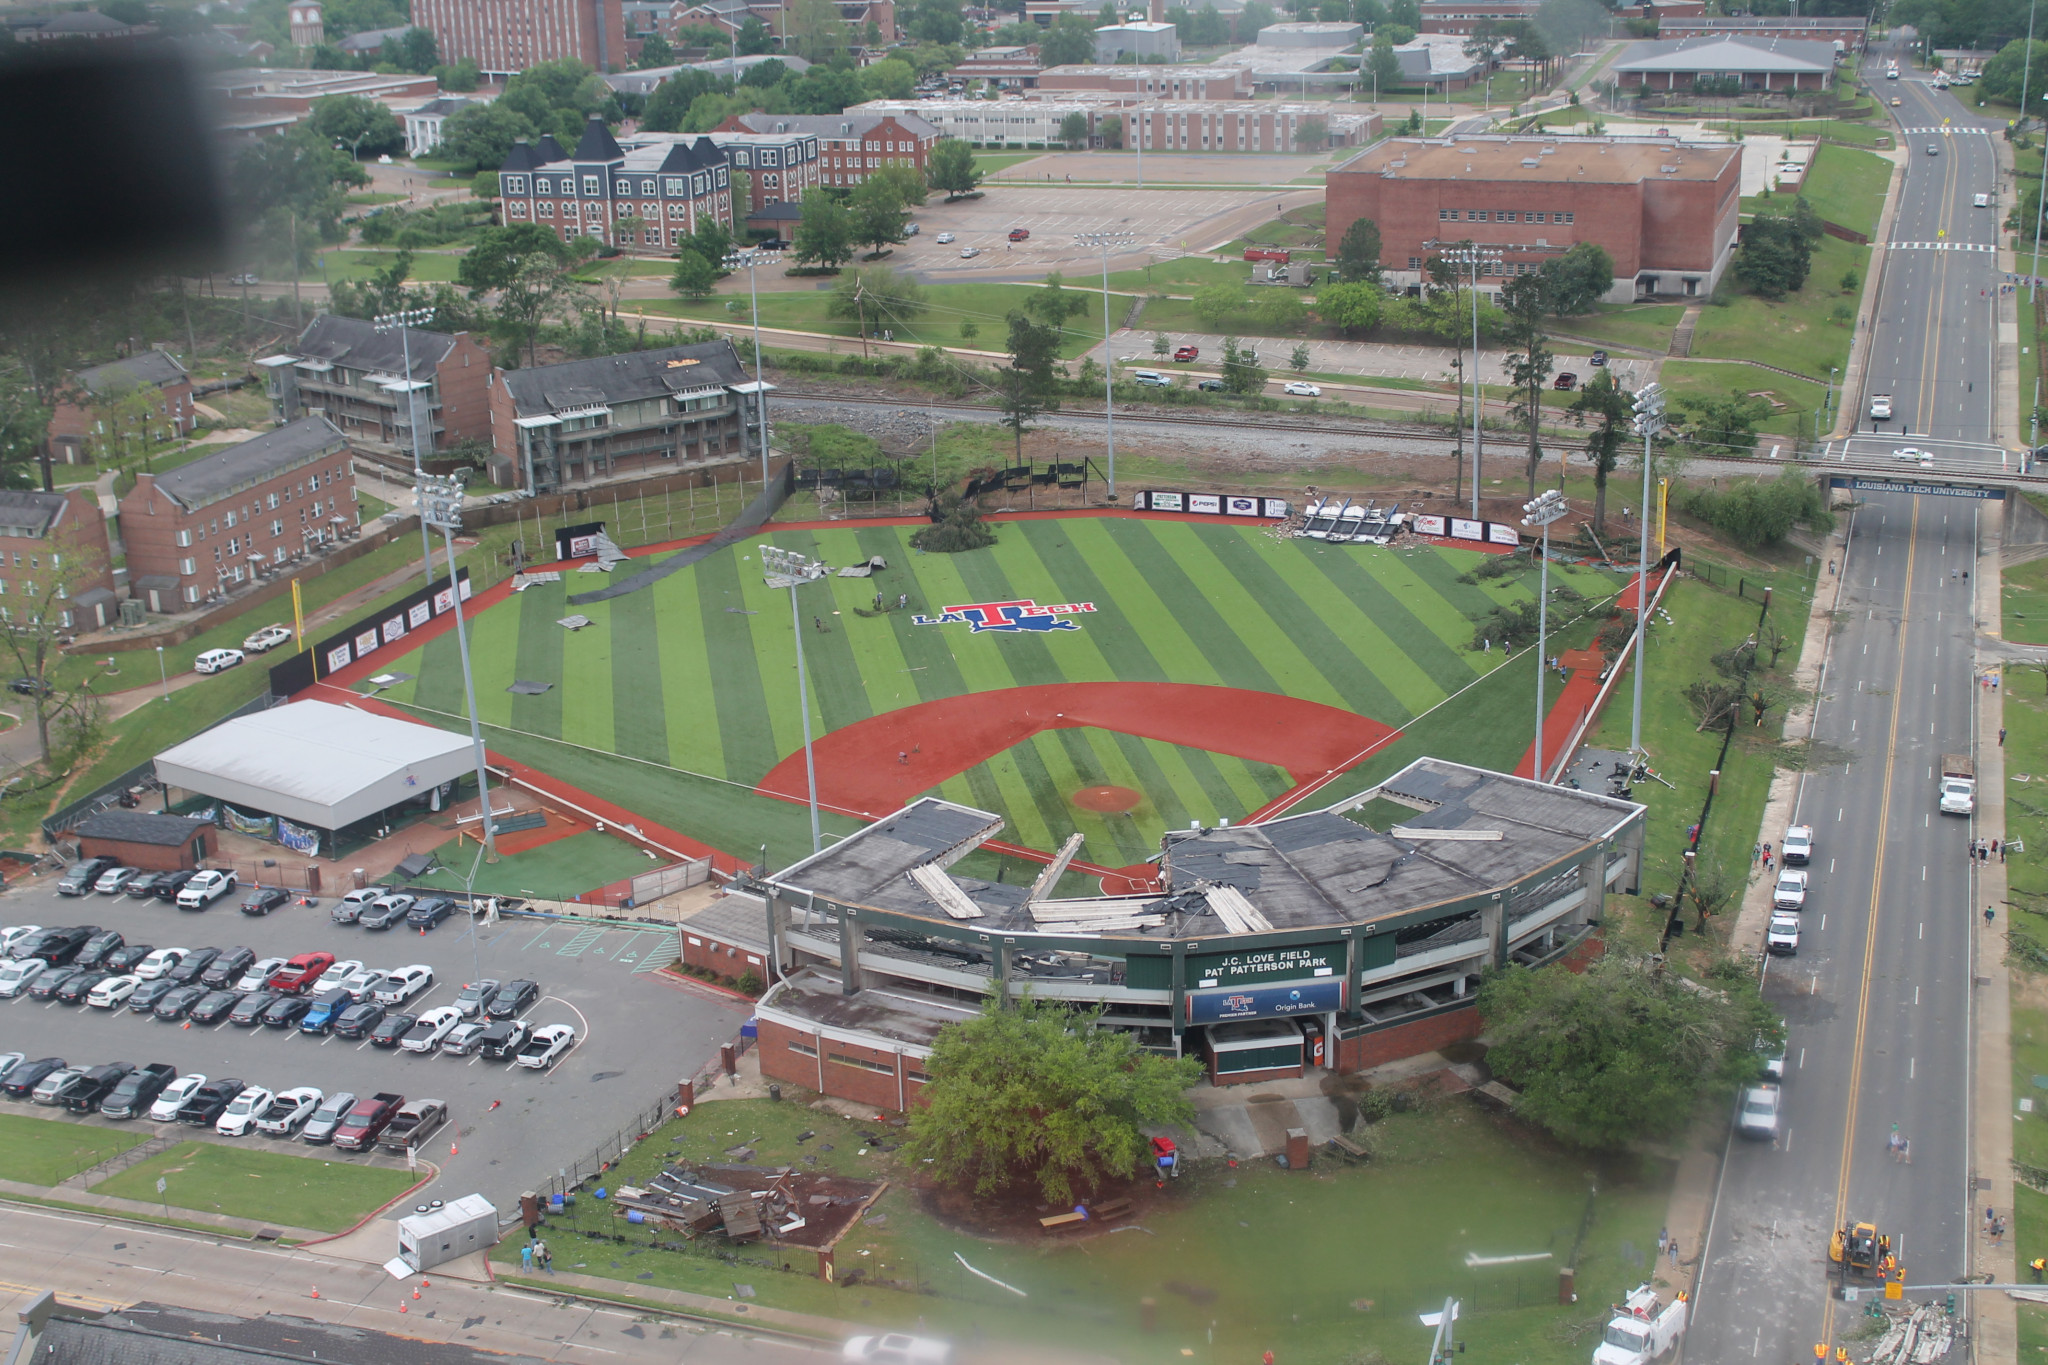 An aerial view from April 25, 2019 of the Louisiana Tech University baseball field.